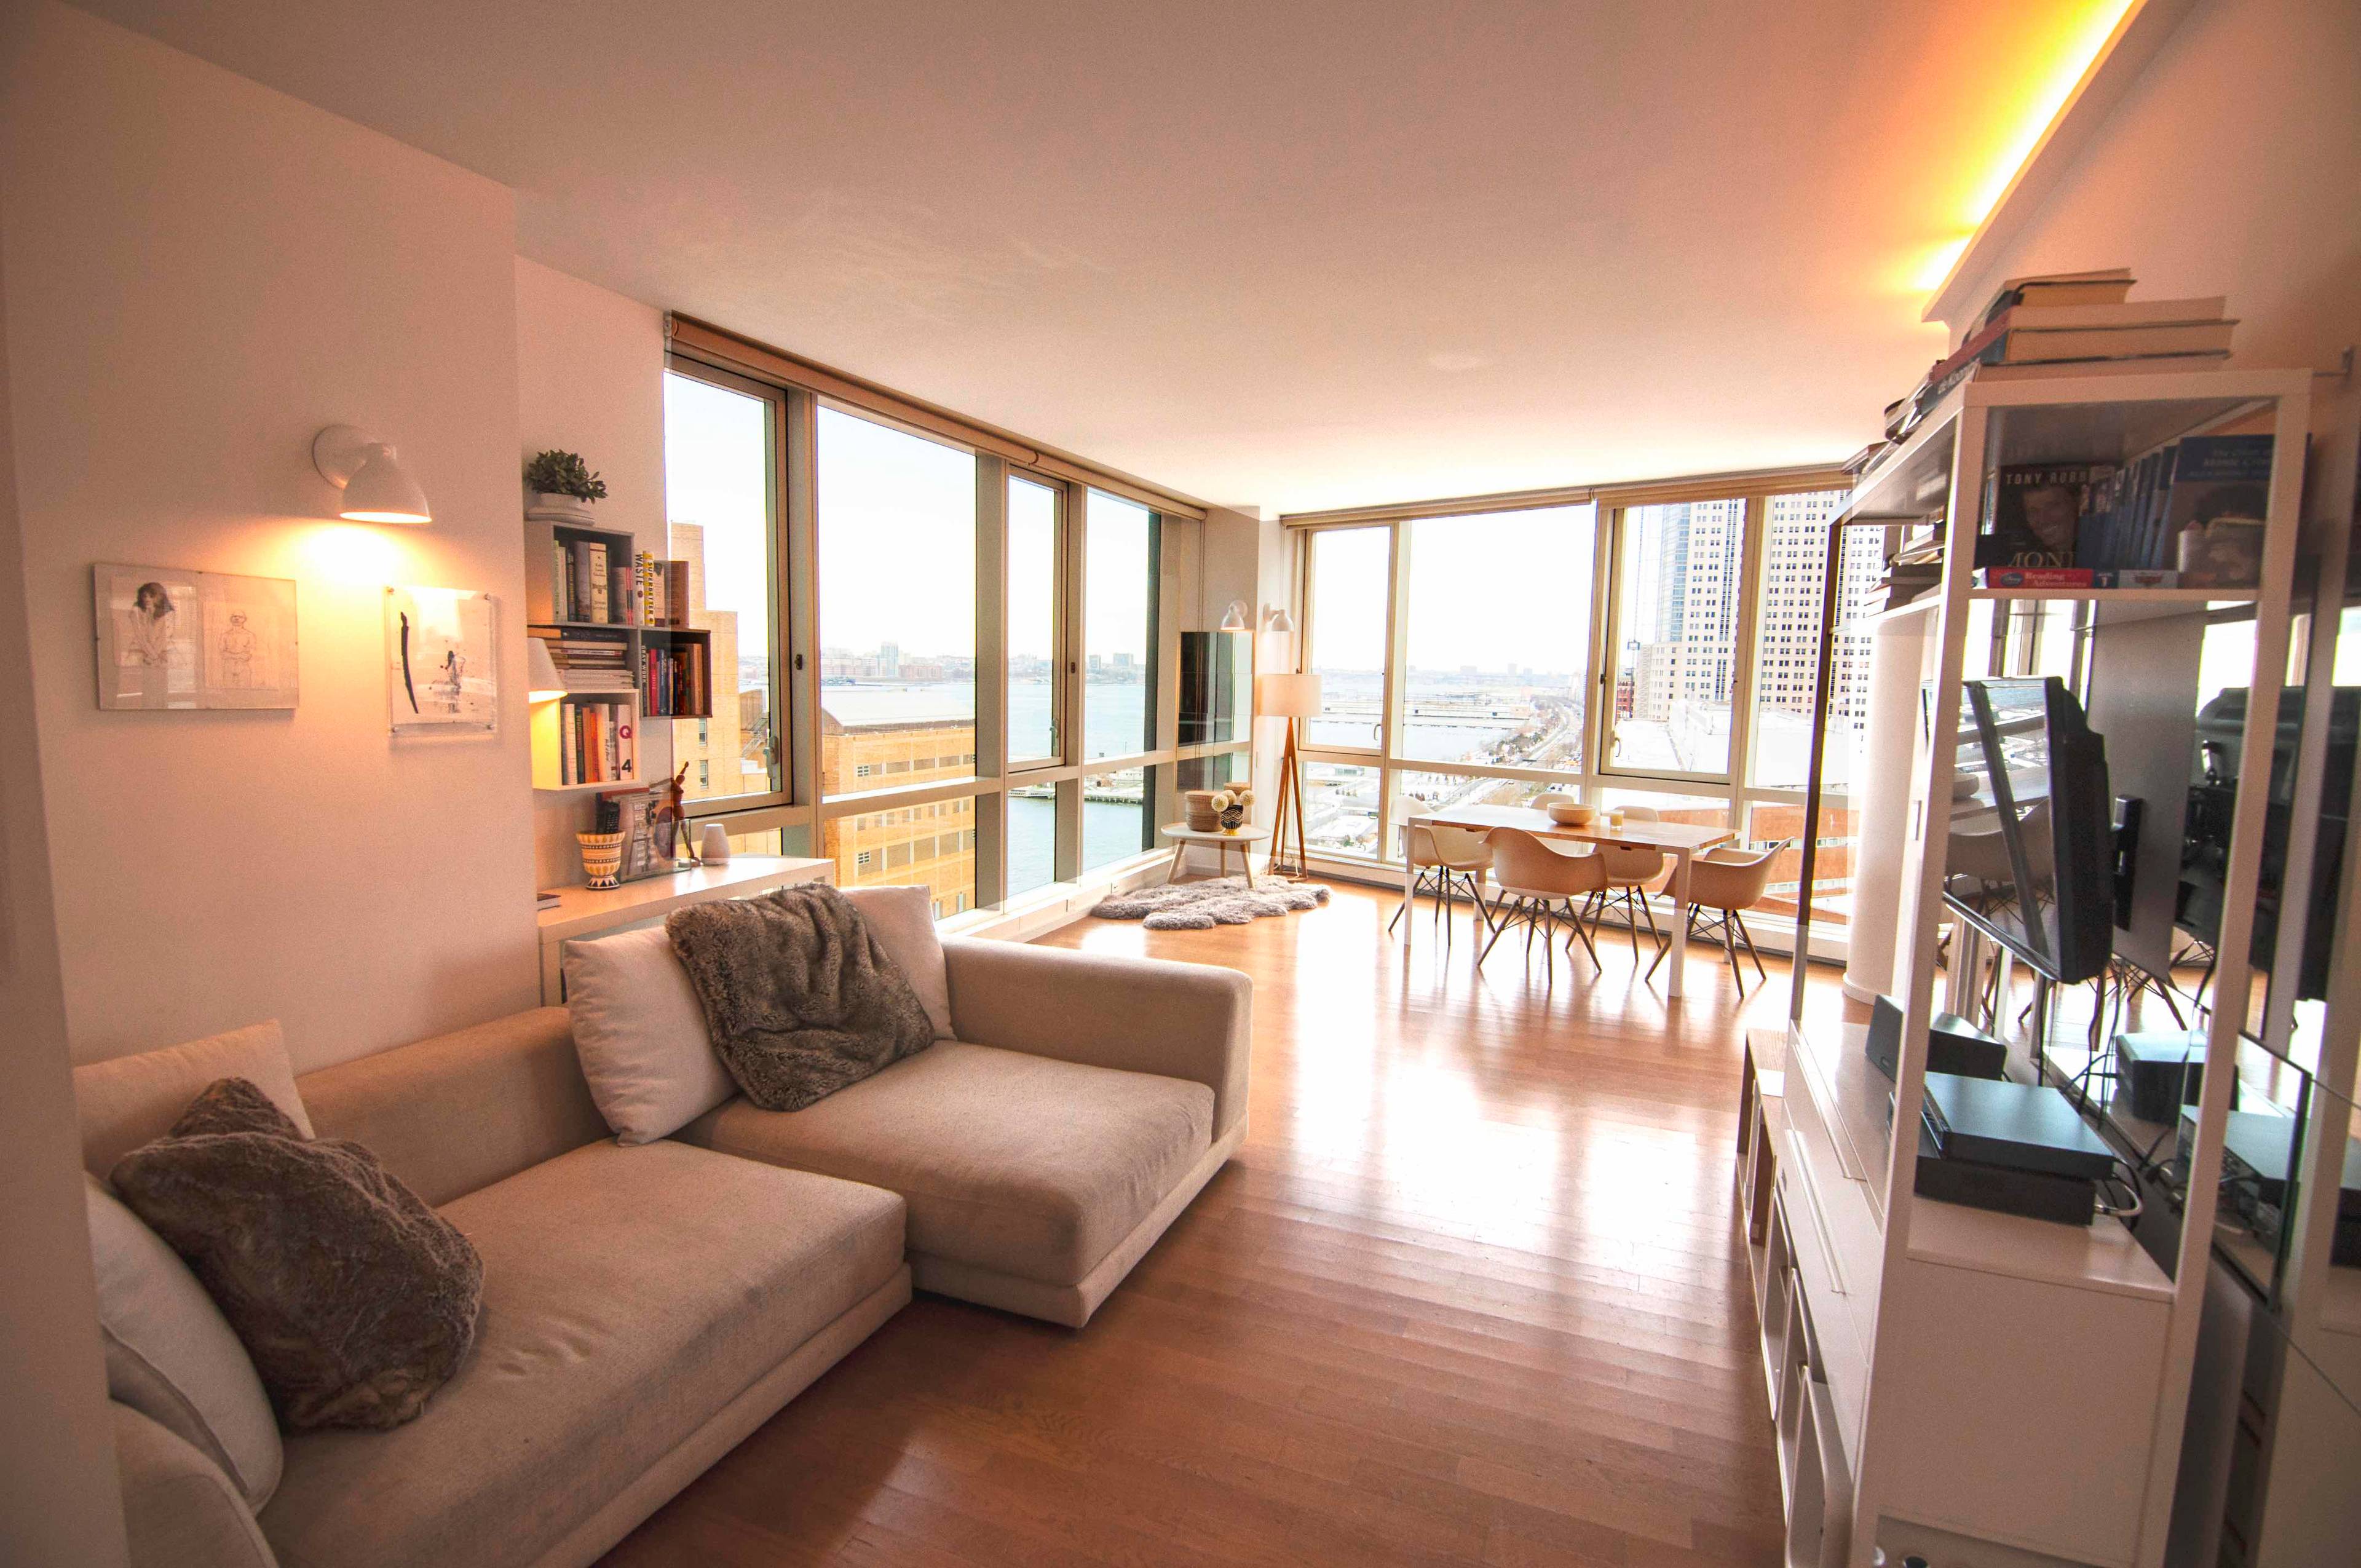 3 Bedrooms 3 Bathrooms and 3 Exposures This Condo unit is situated on a high floor in this luxury building in vibrant Tribeca.